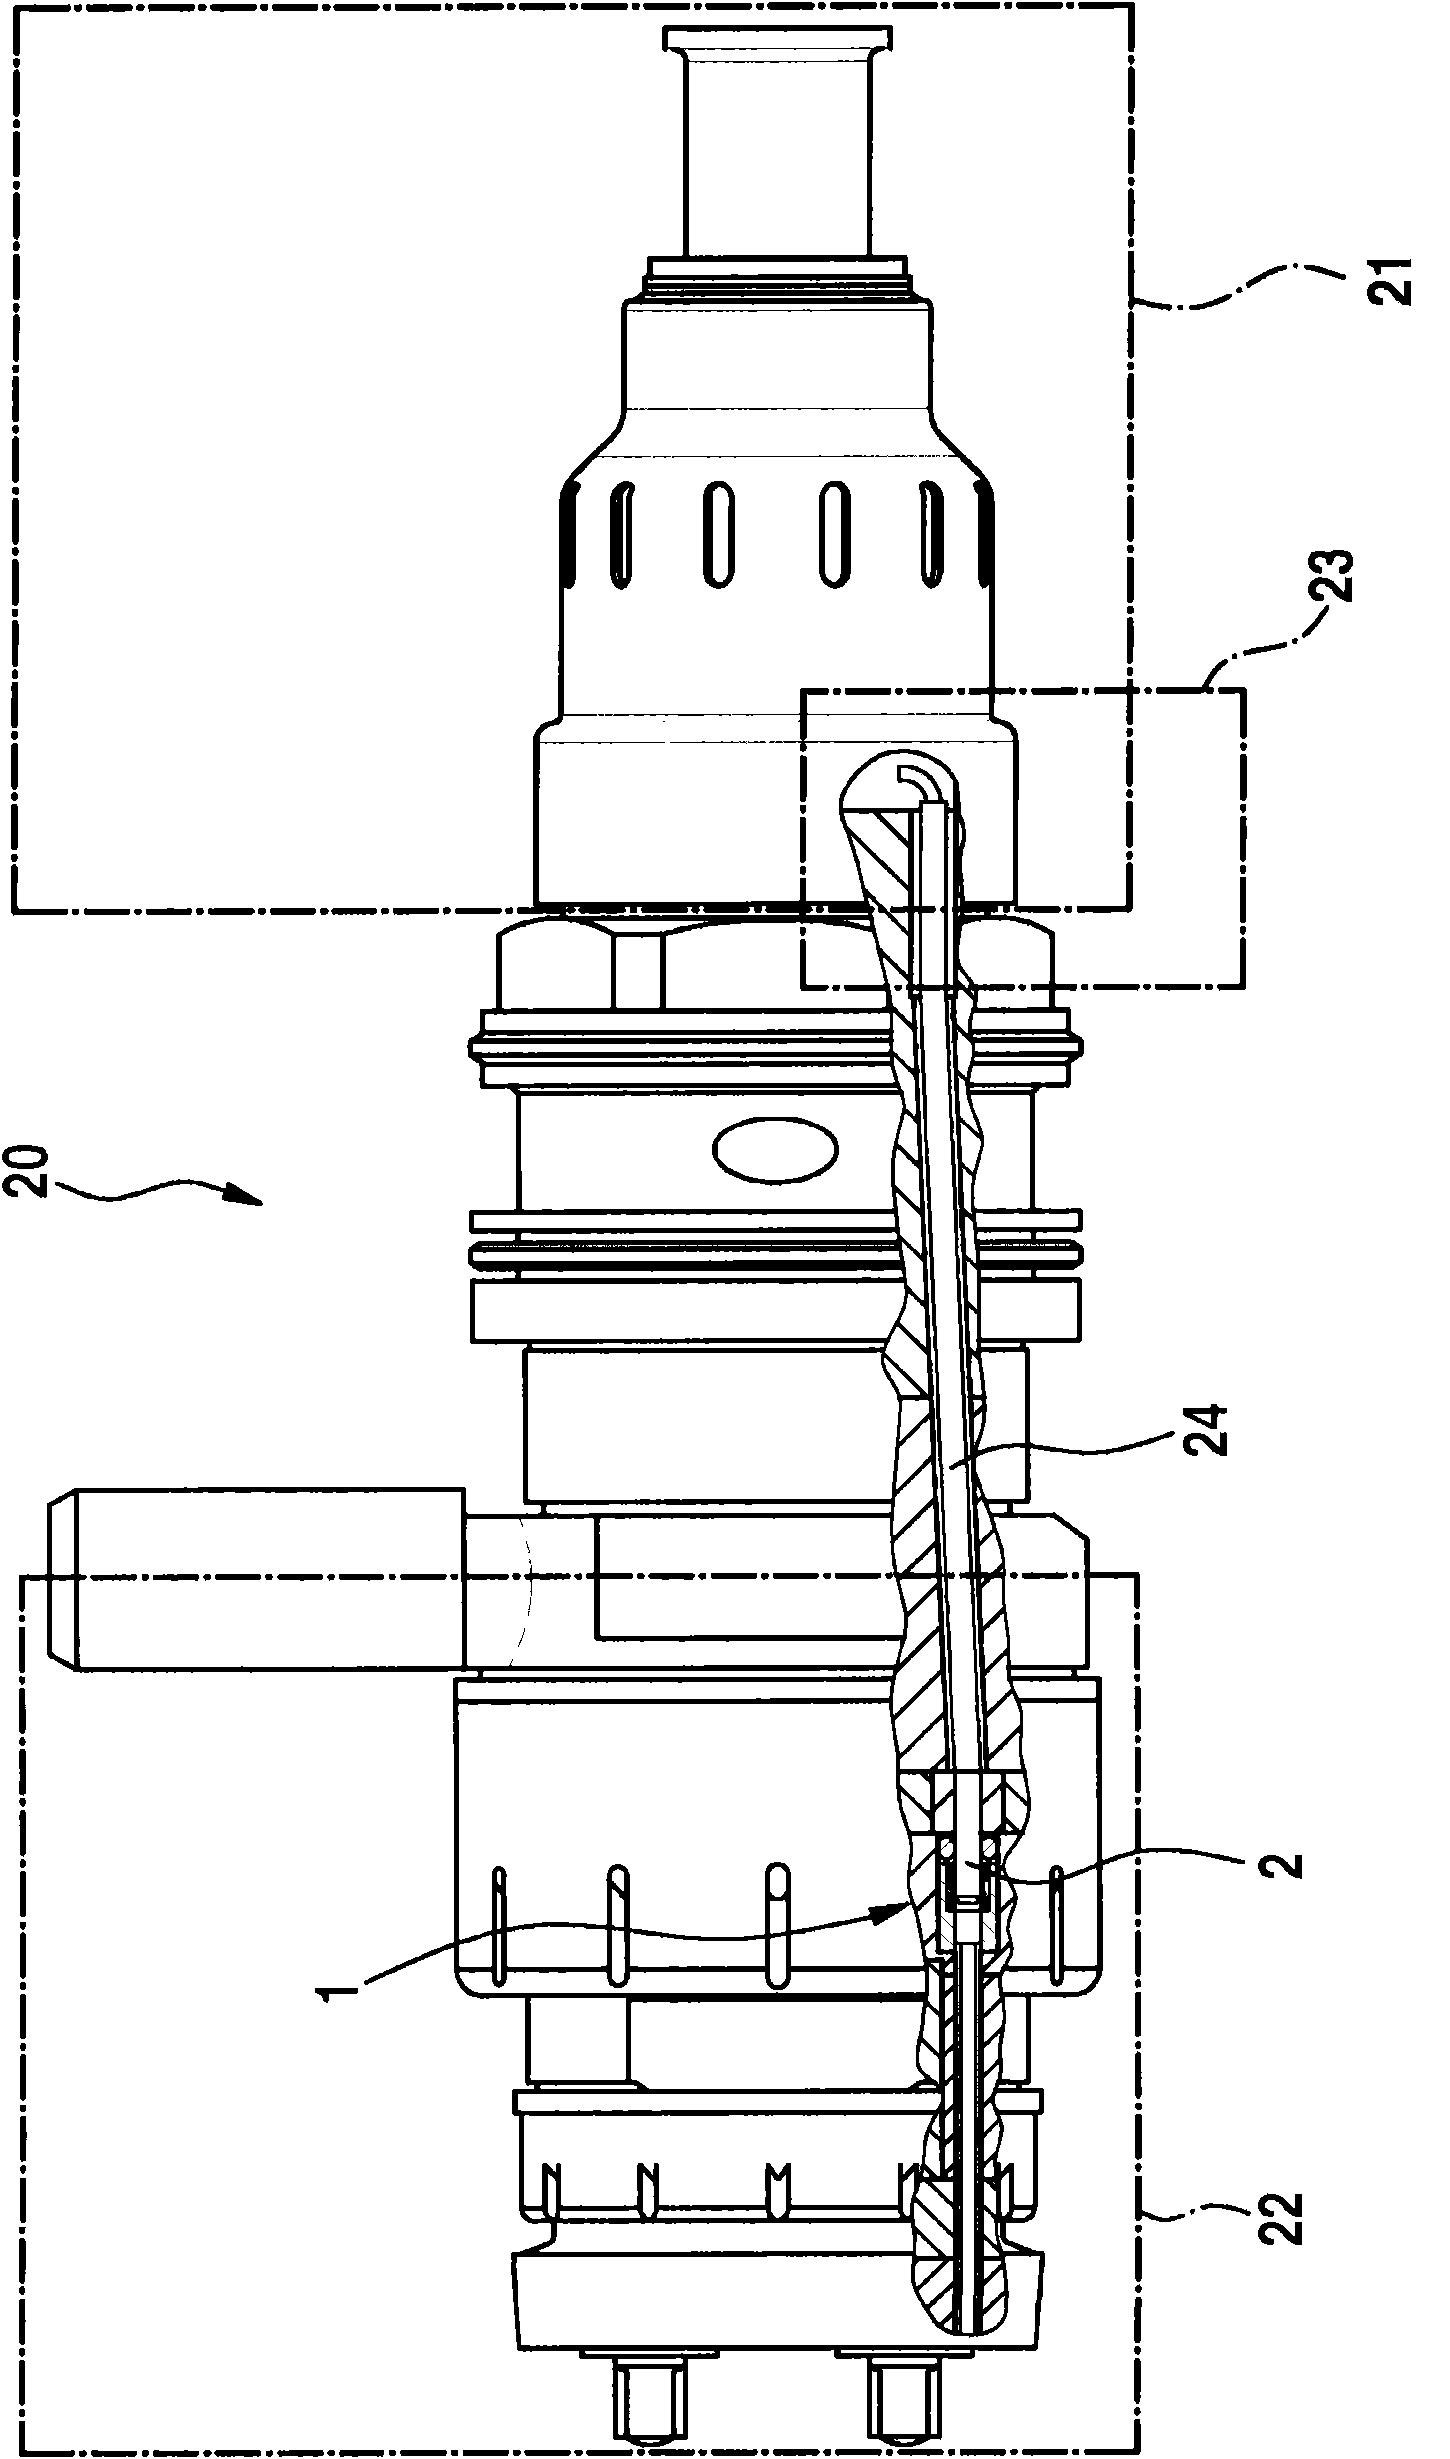 Electrical plug connector as a fuel injector contact for vibration-resistant applications